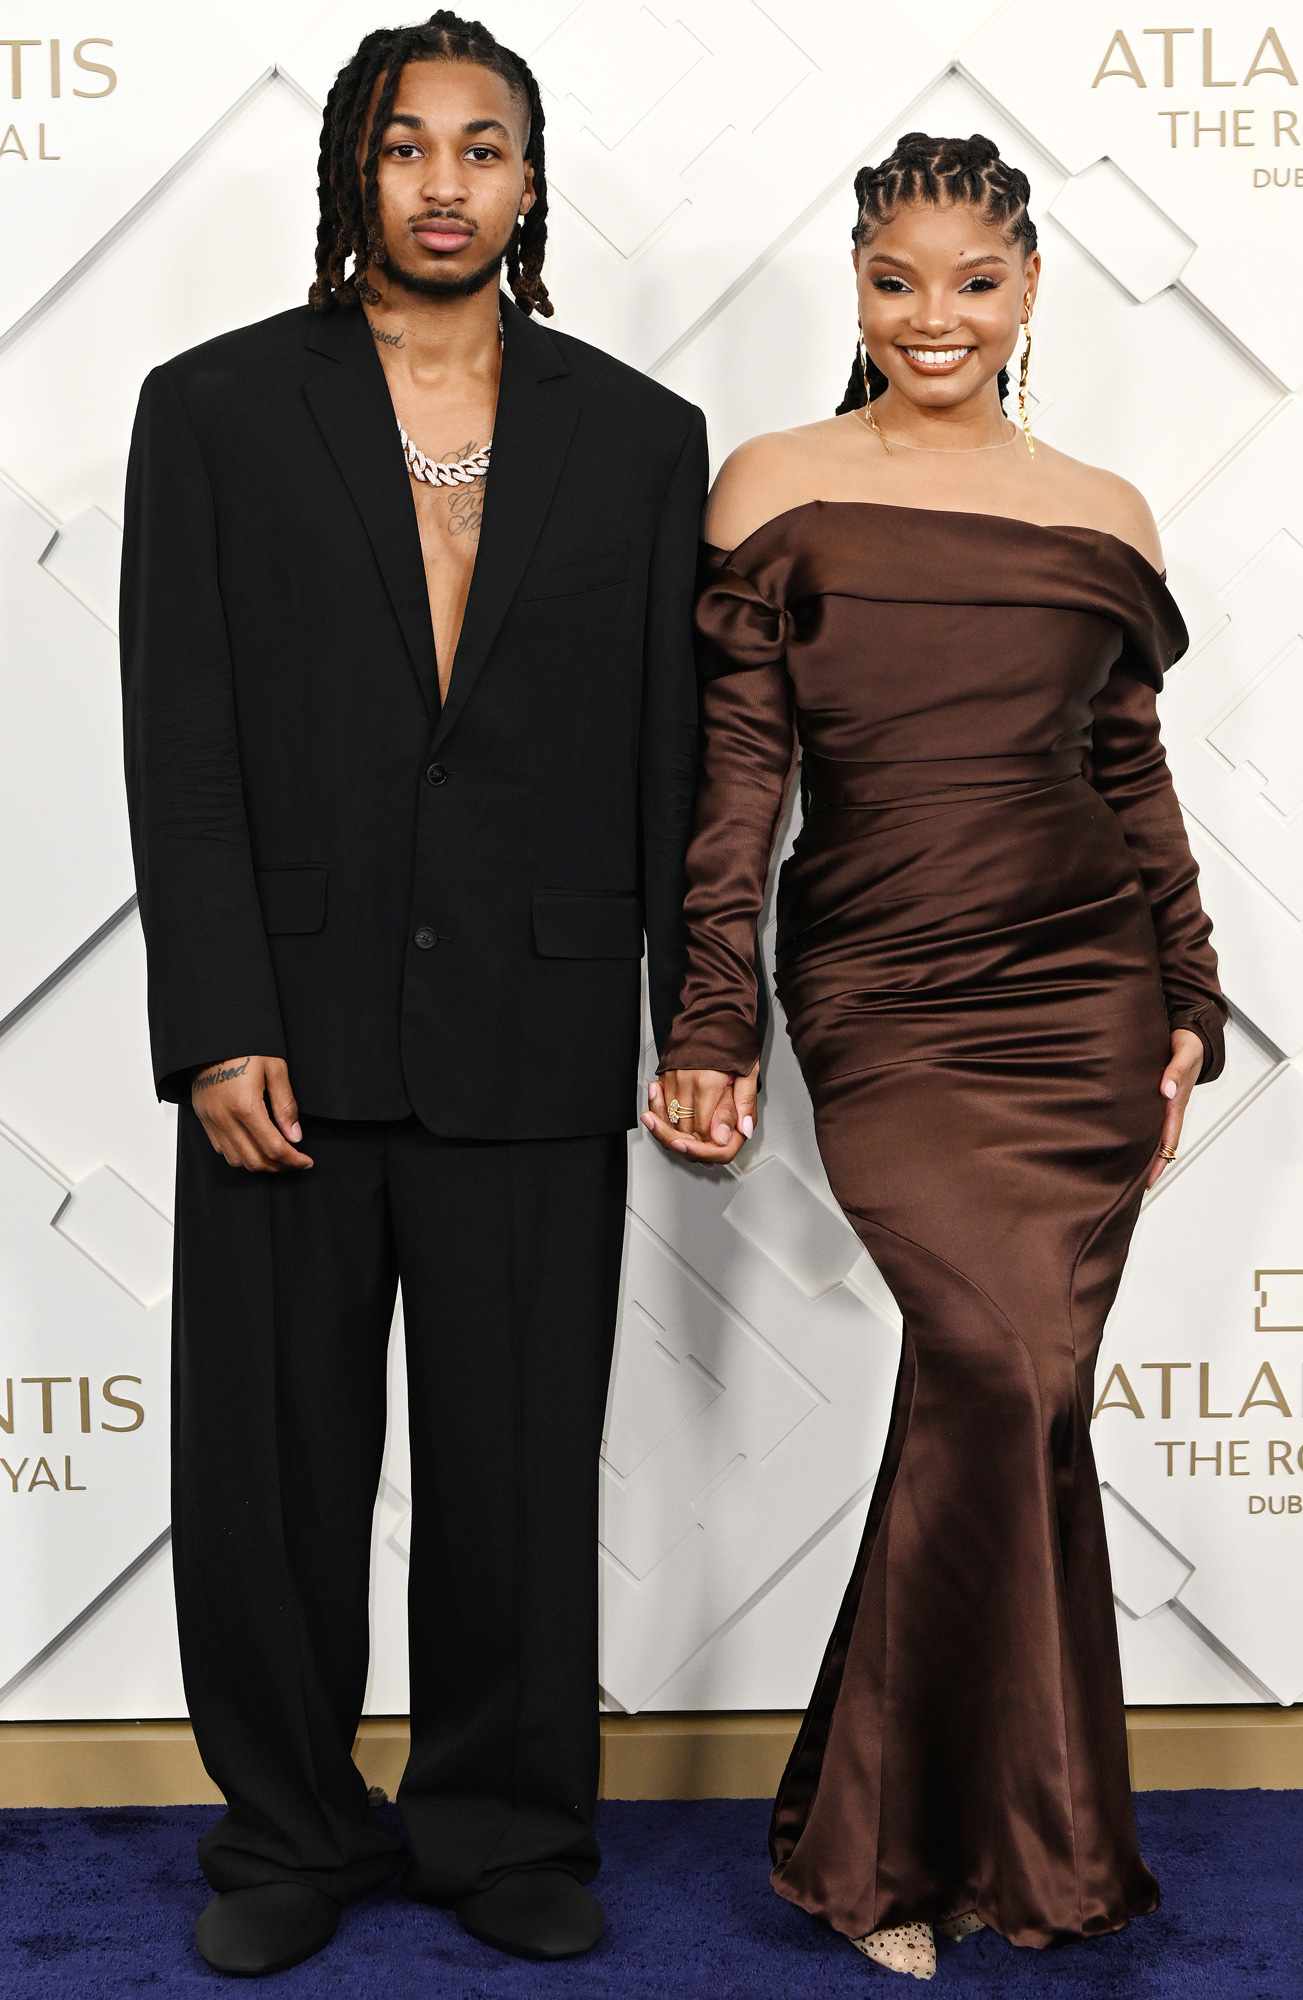 DDG and Halle Bailey attend the Grand Reveal Weekend for Atlantis The Royal, Dubai's new ultra-luxury hotel on January 21, 2023 in Dubai, United Arab Emirates.